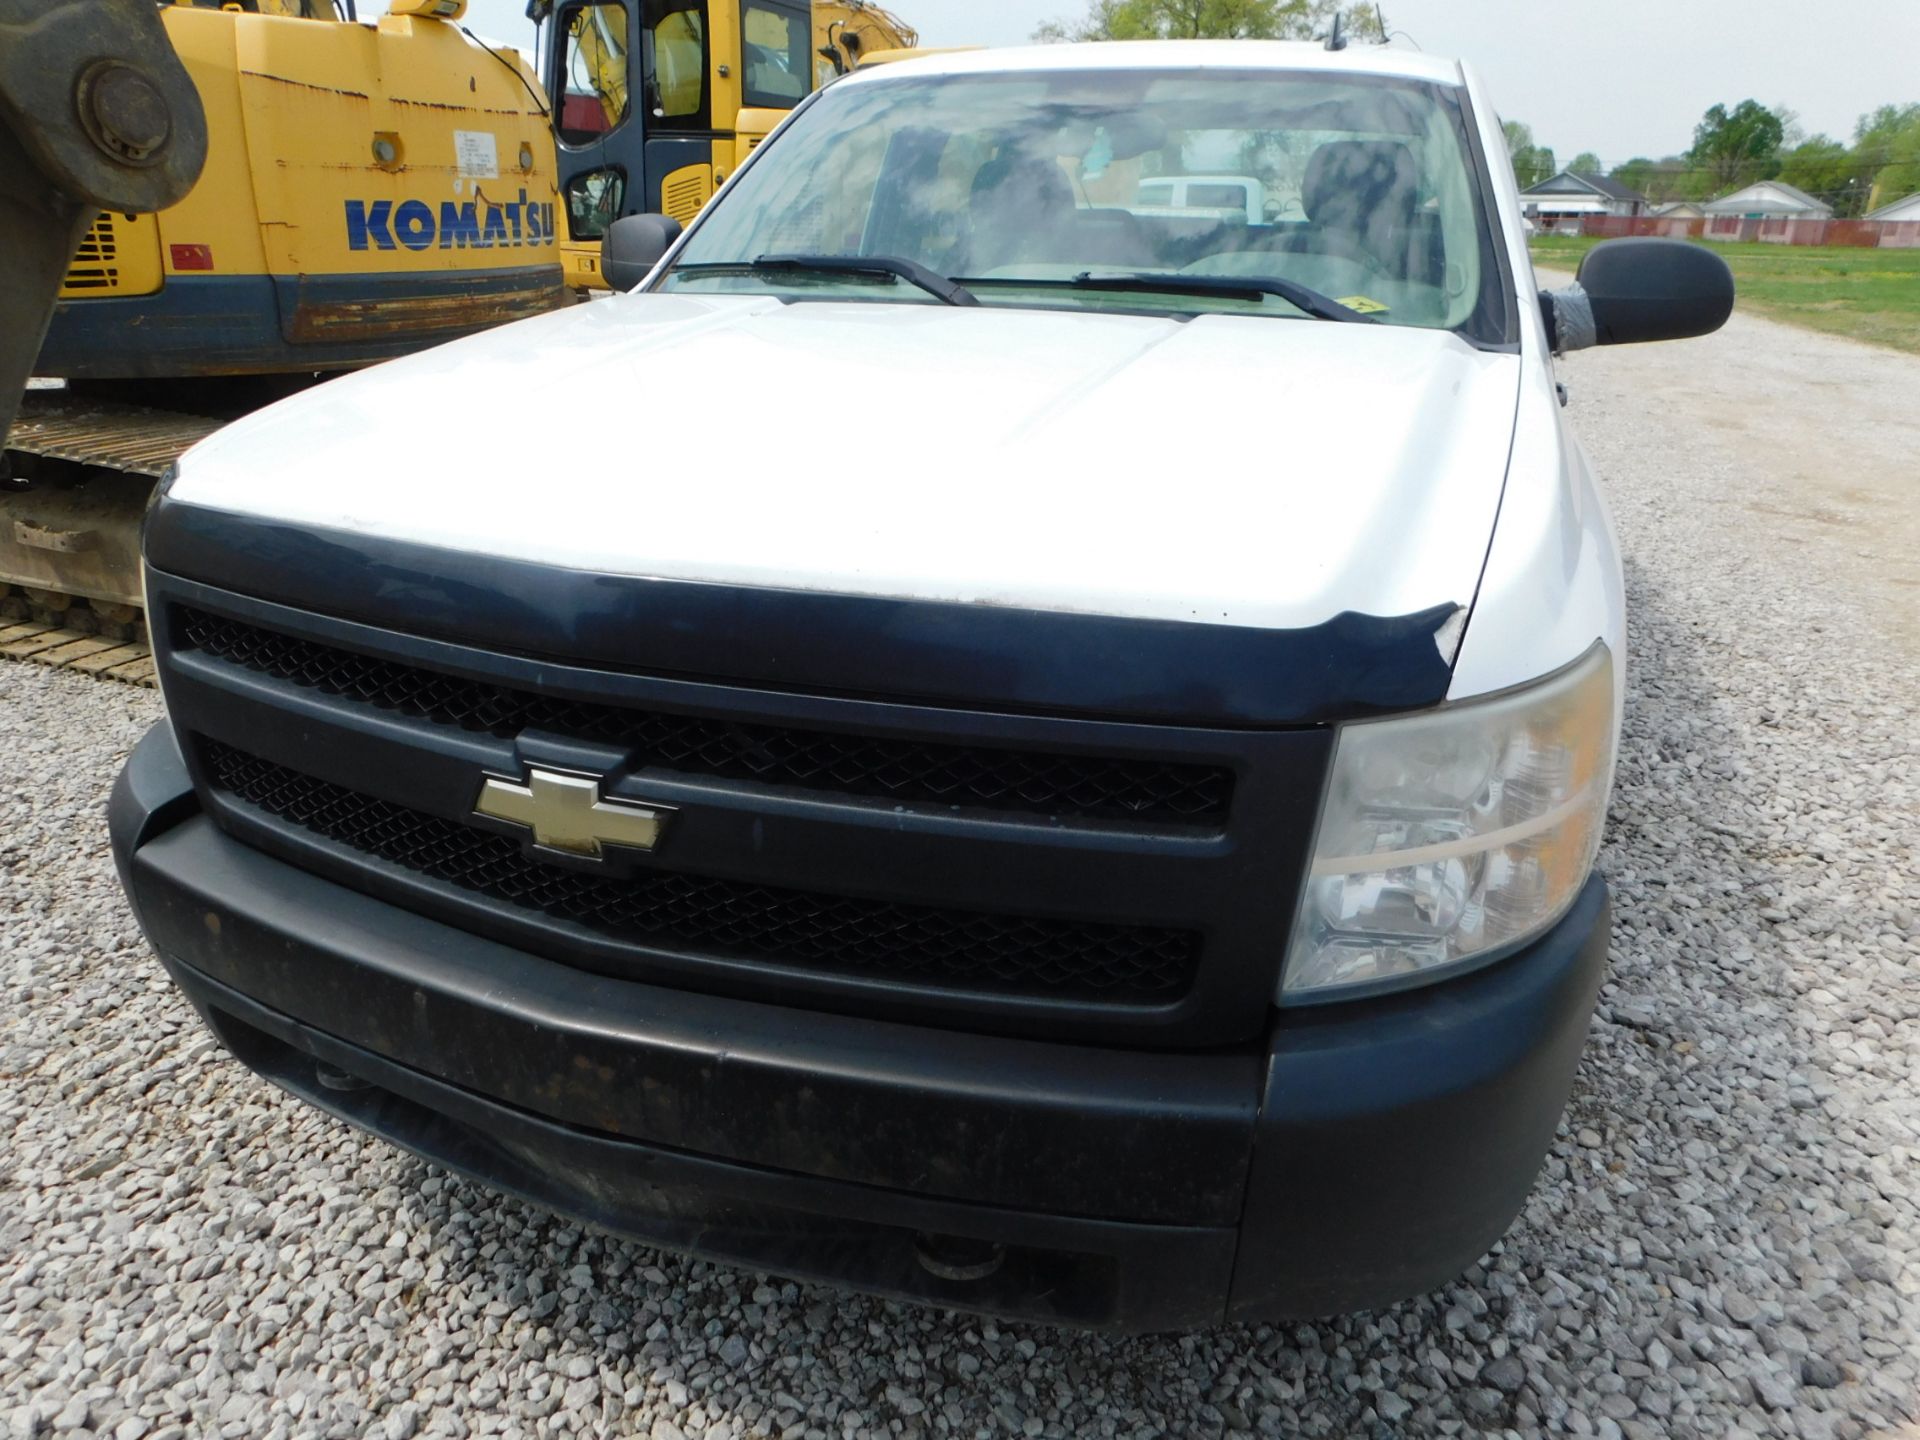 2007 Chevy Silverado 4 dr. pick-up truck, Auto Trans. , Air, am/fm, 4 Wheel Drive, 297,470 miles - Image 2 of 31